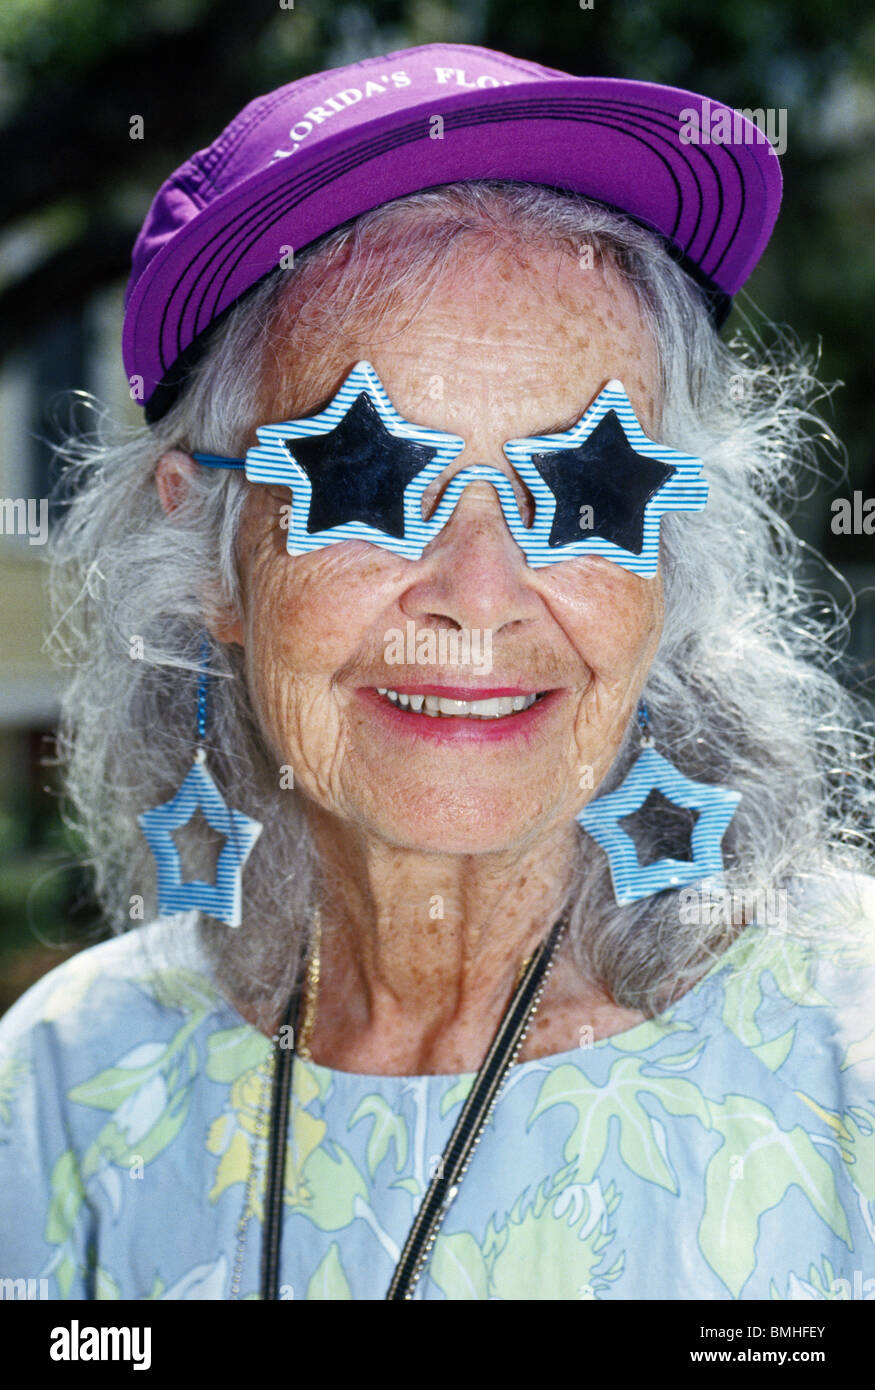 A spunky senior American woman shows off her star-shaped sunglasses and matching earrings while on vacation in Florida, the Sunshine State. Stock Photo